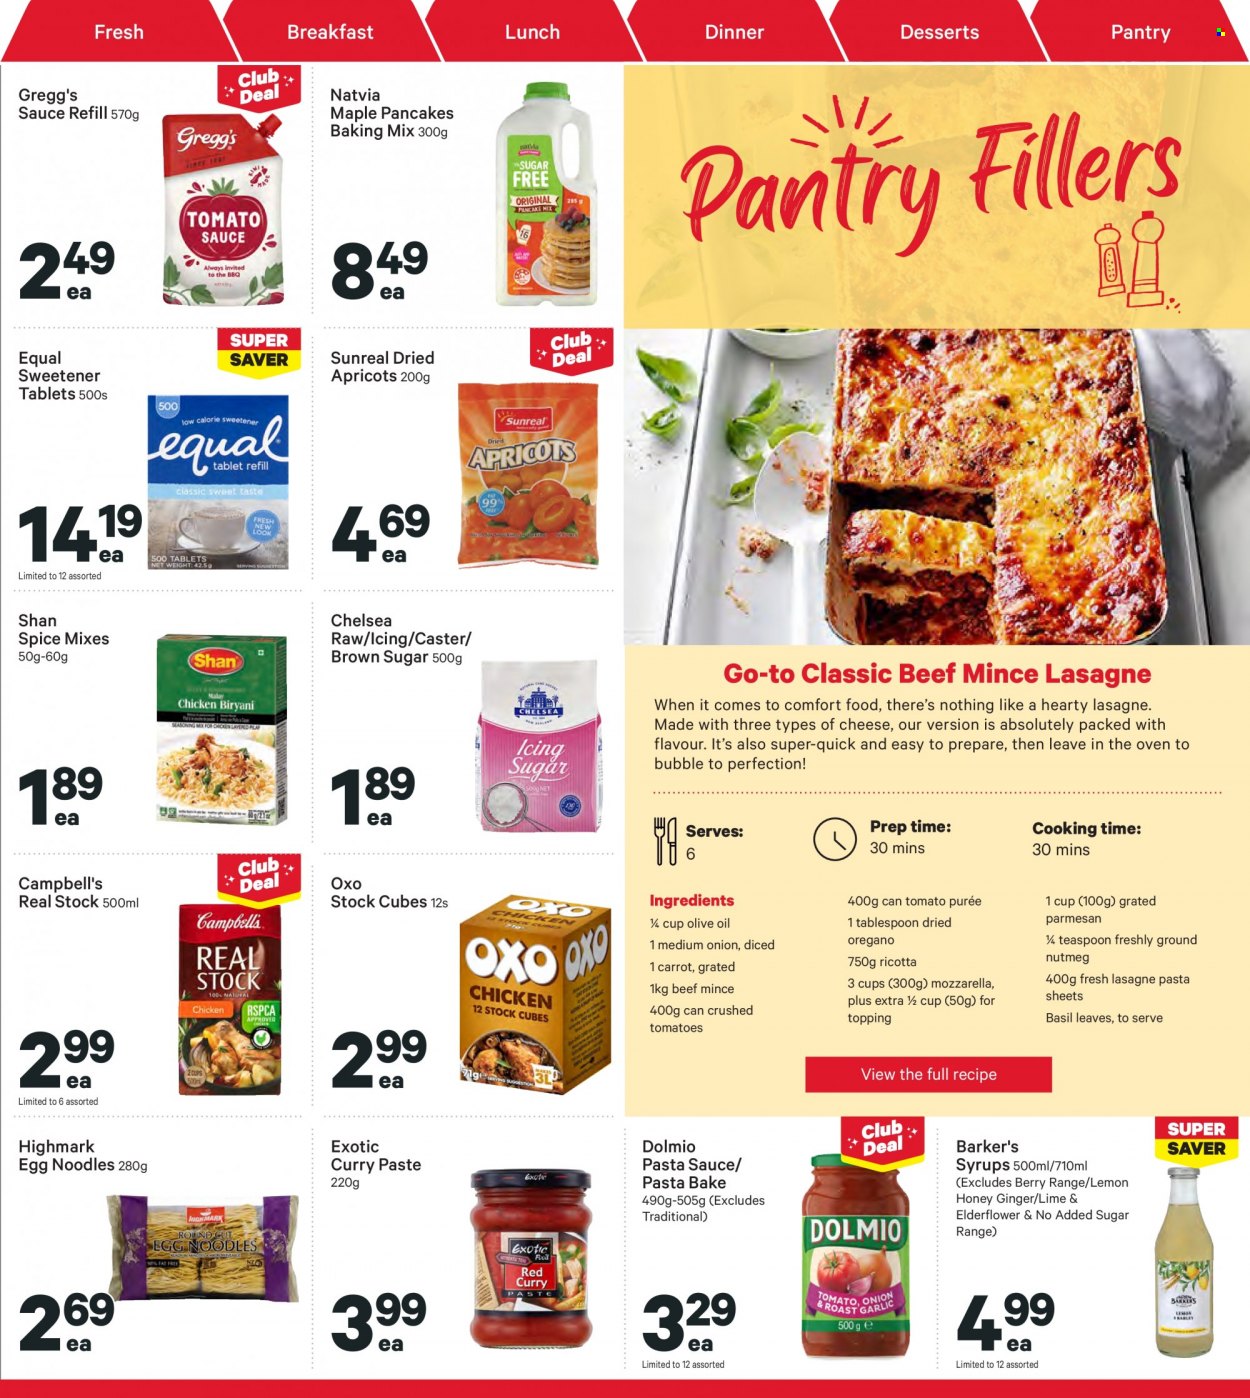 thumbnail - New World mailer - 16.05.2022 - 22.05.2022 - Sales products - ginger, tomatoes, onion, apricots, Campbell's, pasta sauce, pancakes, noodles, mozzarella, ricotta, parmesan, cheese, cane sugar, topping, sweetener, crushed tomatoes, tomato sauce, tomato puree, egg noodles, esponja, nutmeg, spice, curry paste, olive oil, oil, honey, dried fruit, beef meat, ground beef, teaspoon. Page 19.